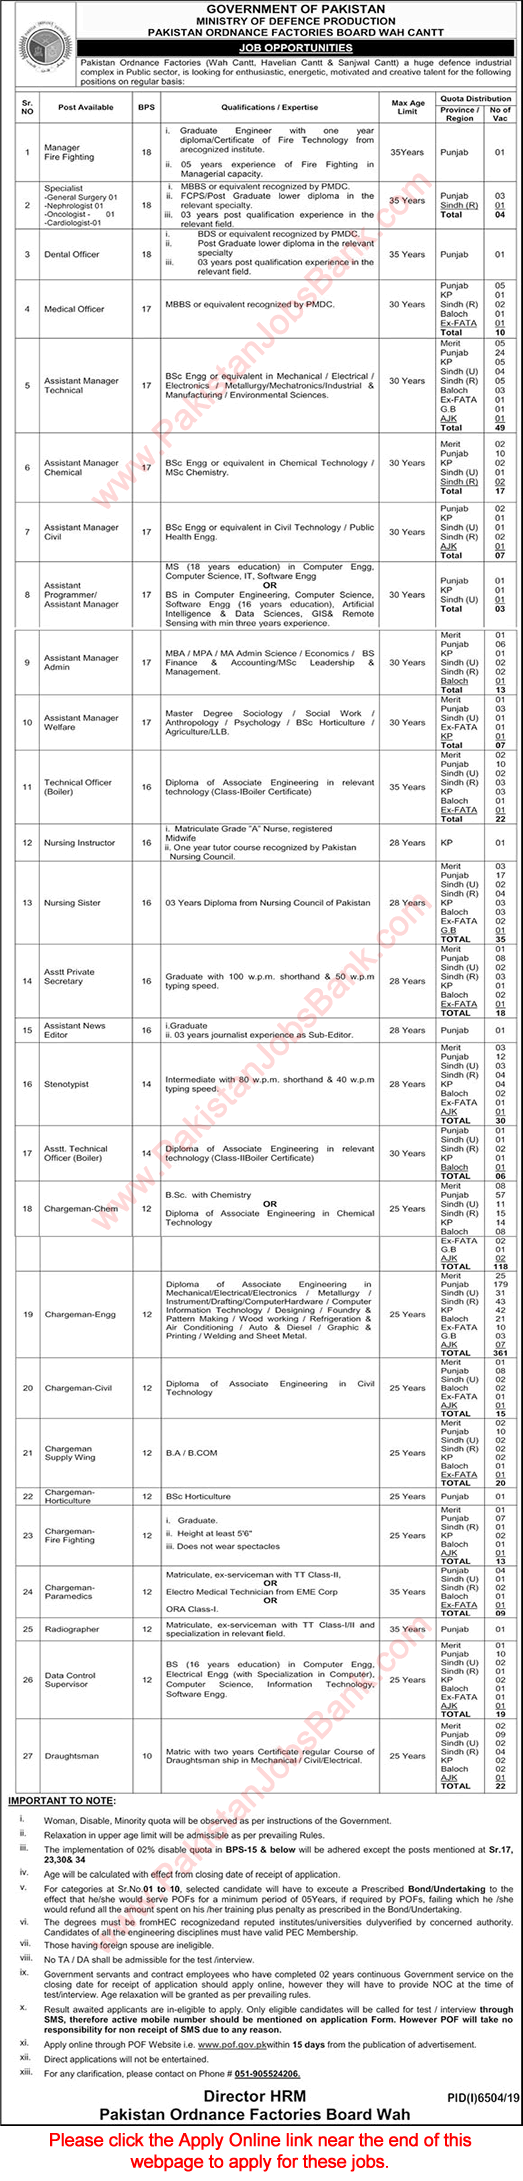 POF Jobs June 2020 Apply Online Chargeman, Assistant Managers & Others Pakistan Ordnance Factories Latest